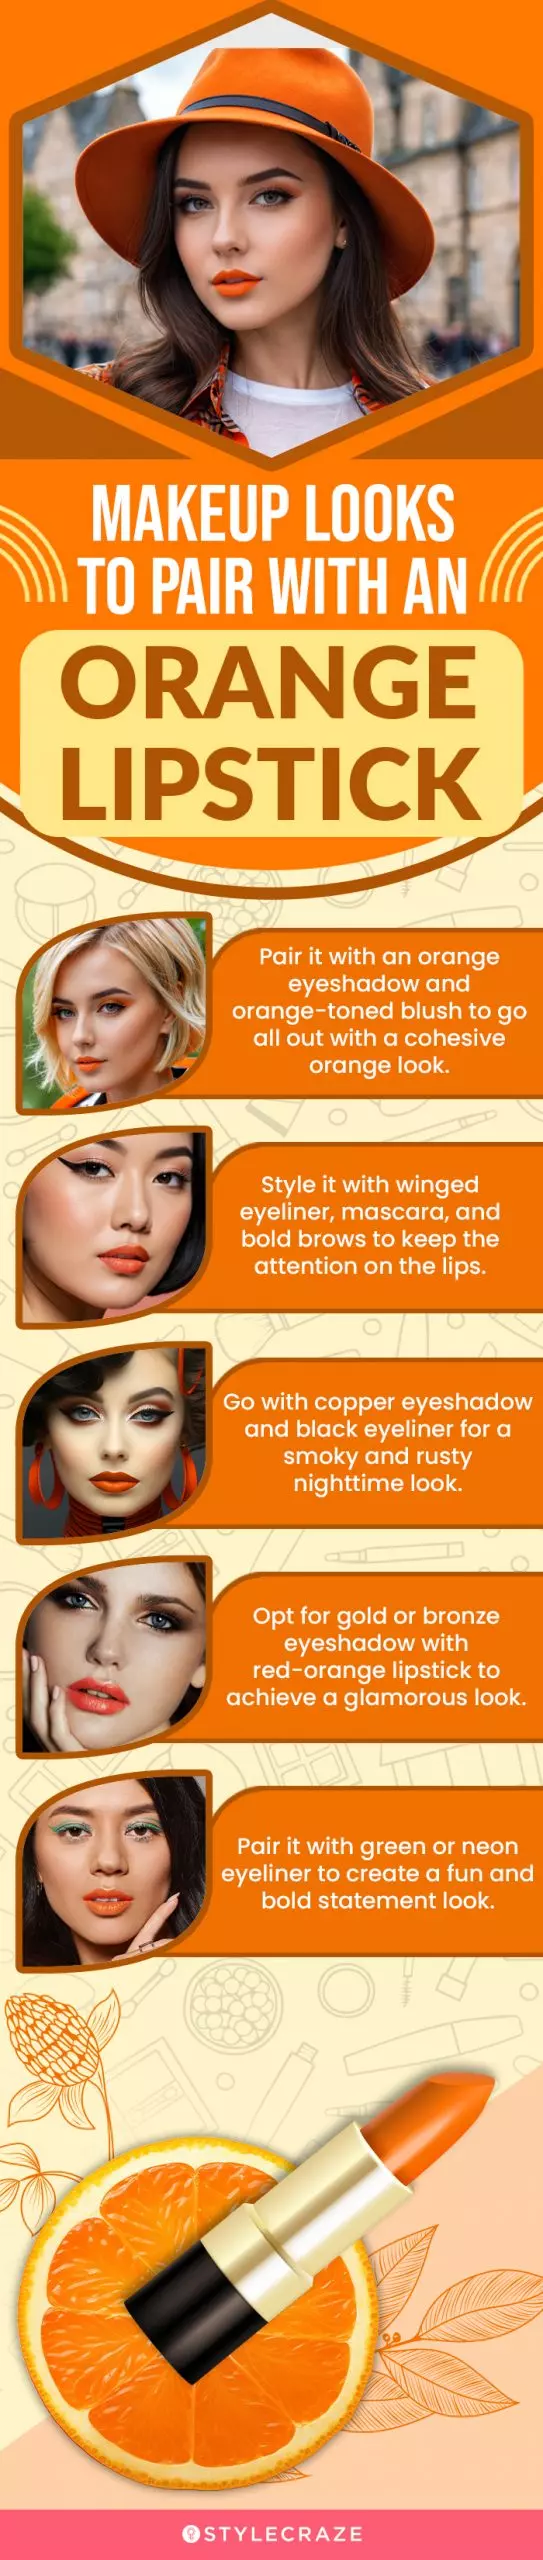 Makeup Looks To Pair With An Orange Lipstick (infographic)